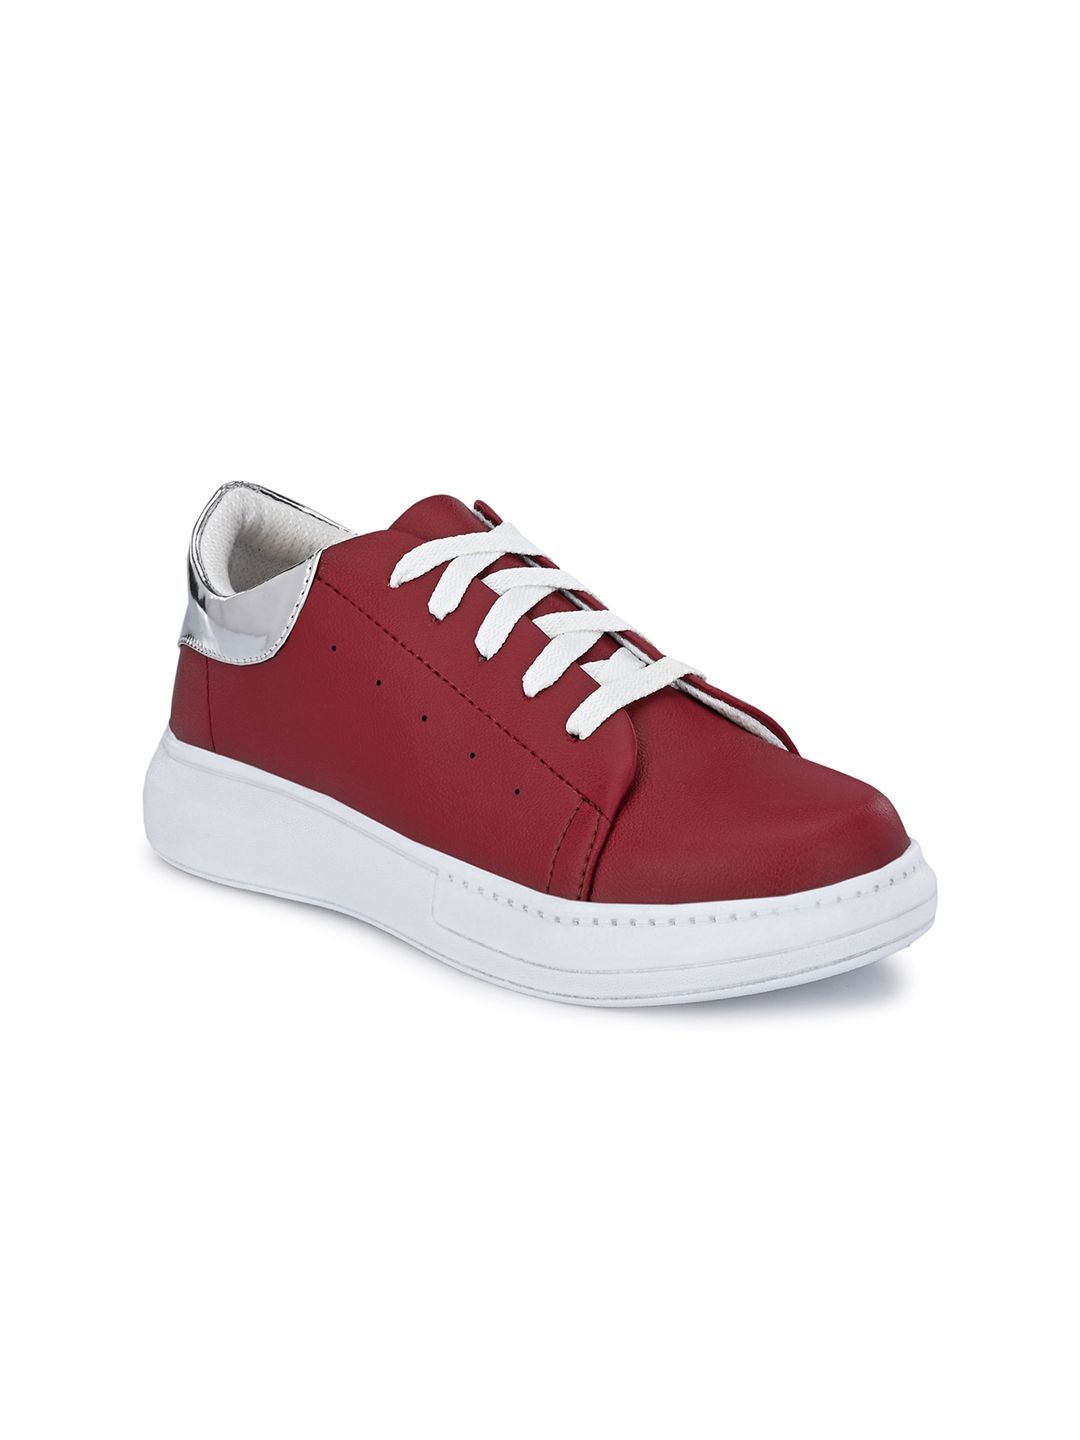 El Paso Women Casual Lace Up Sneakers Price in India